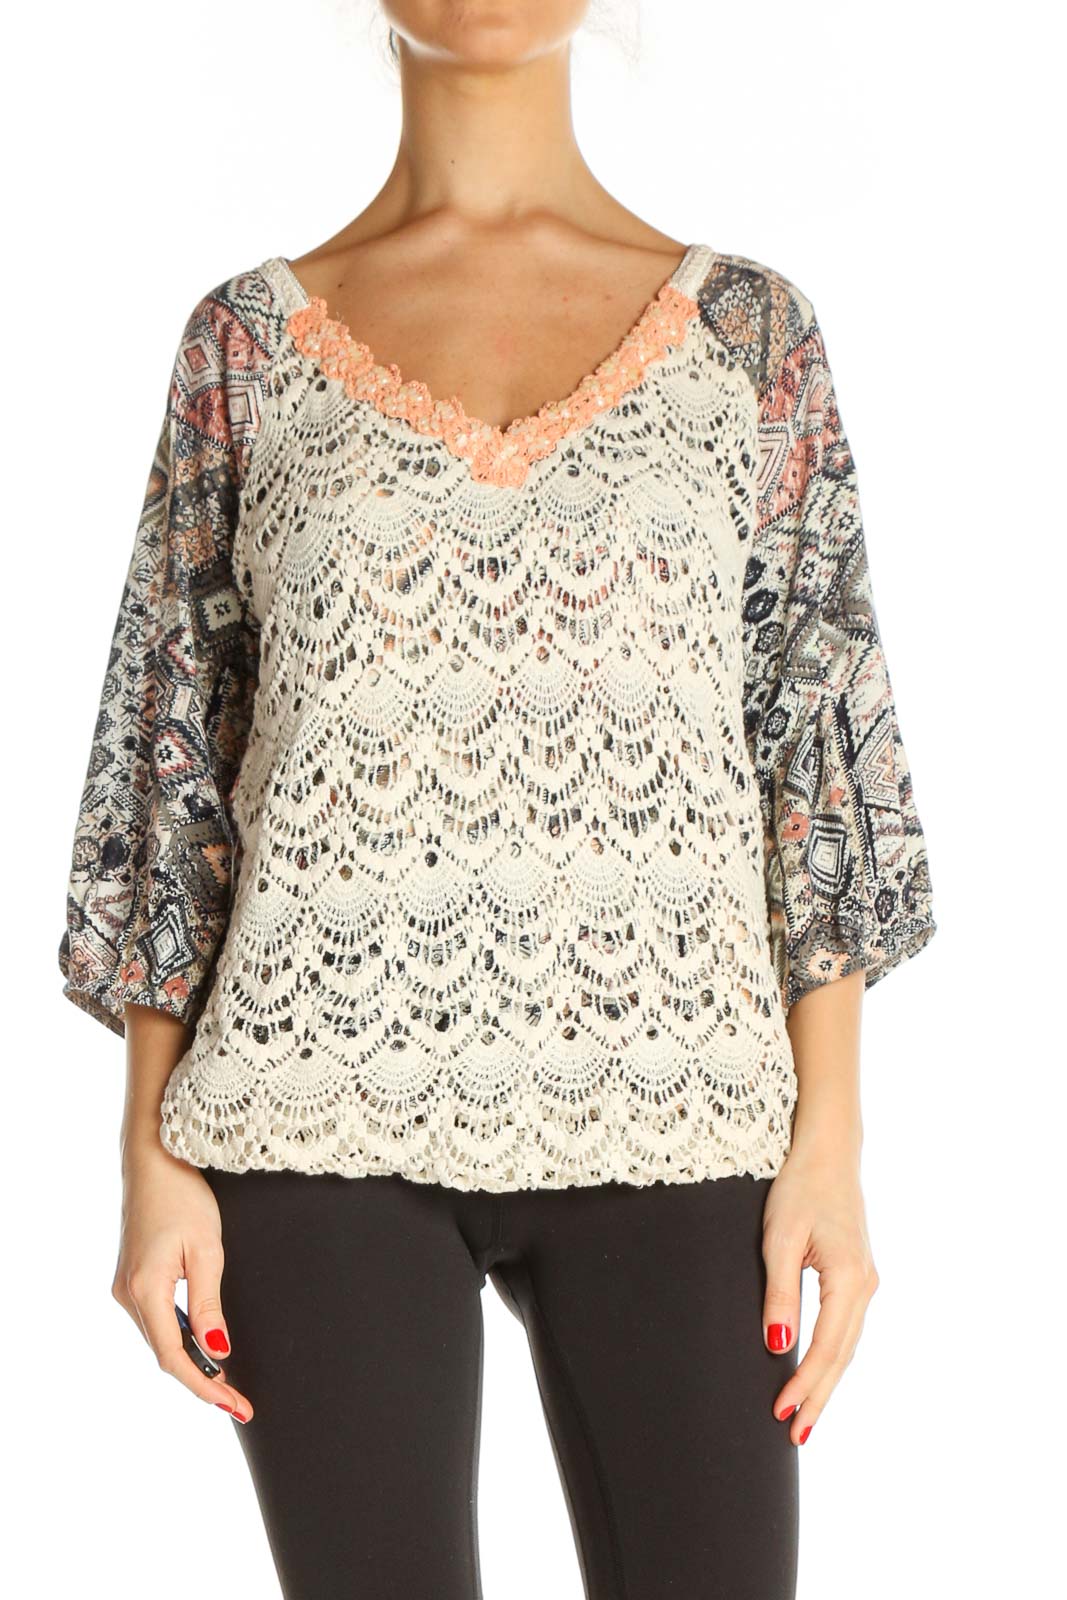 Beige Textured Casual Blouse Front